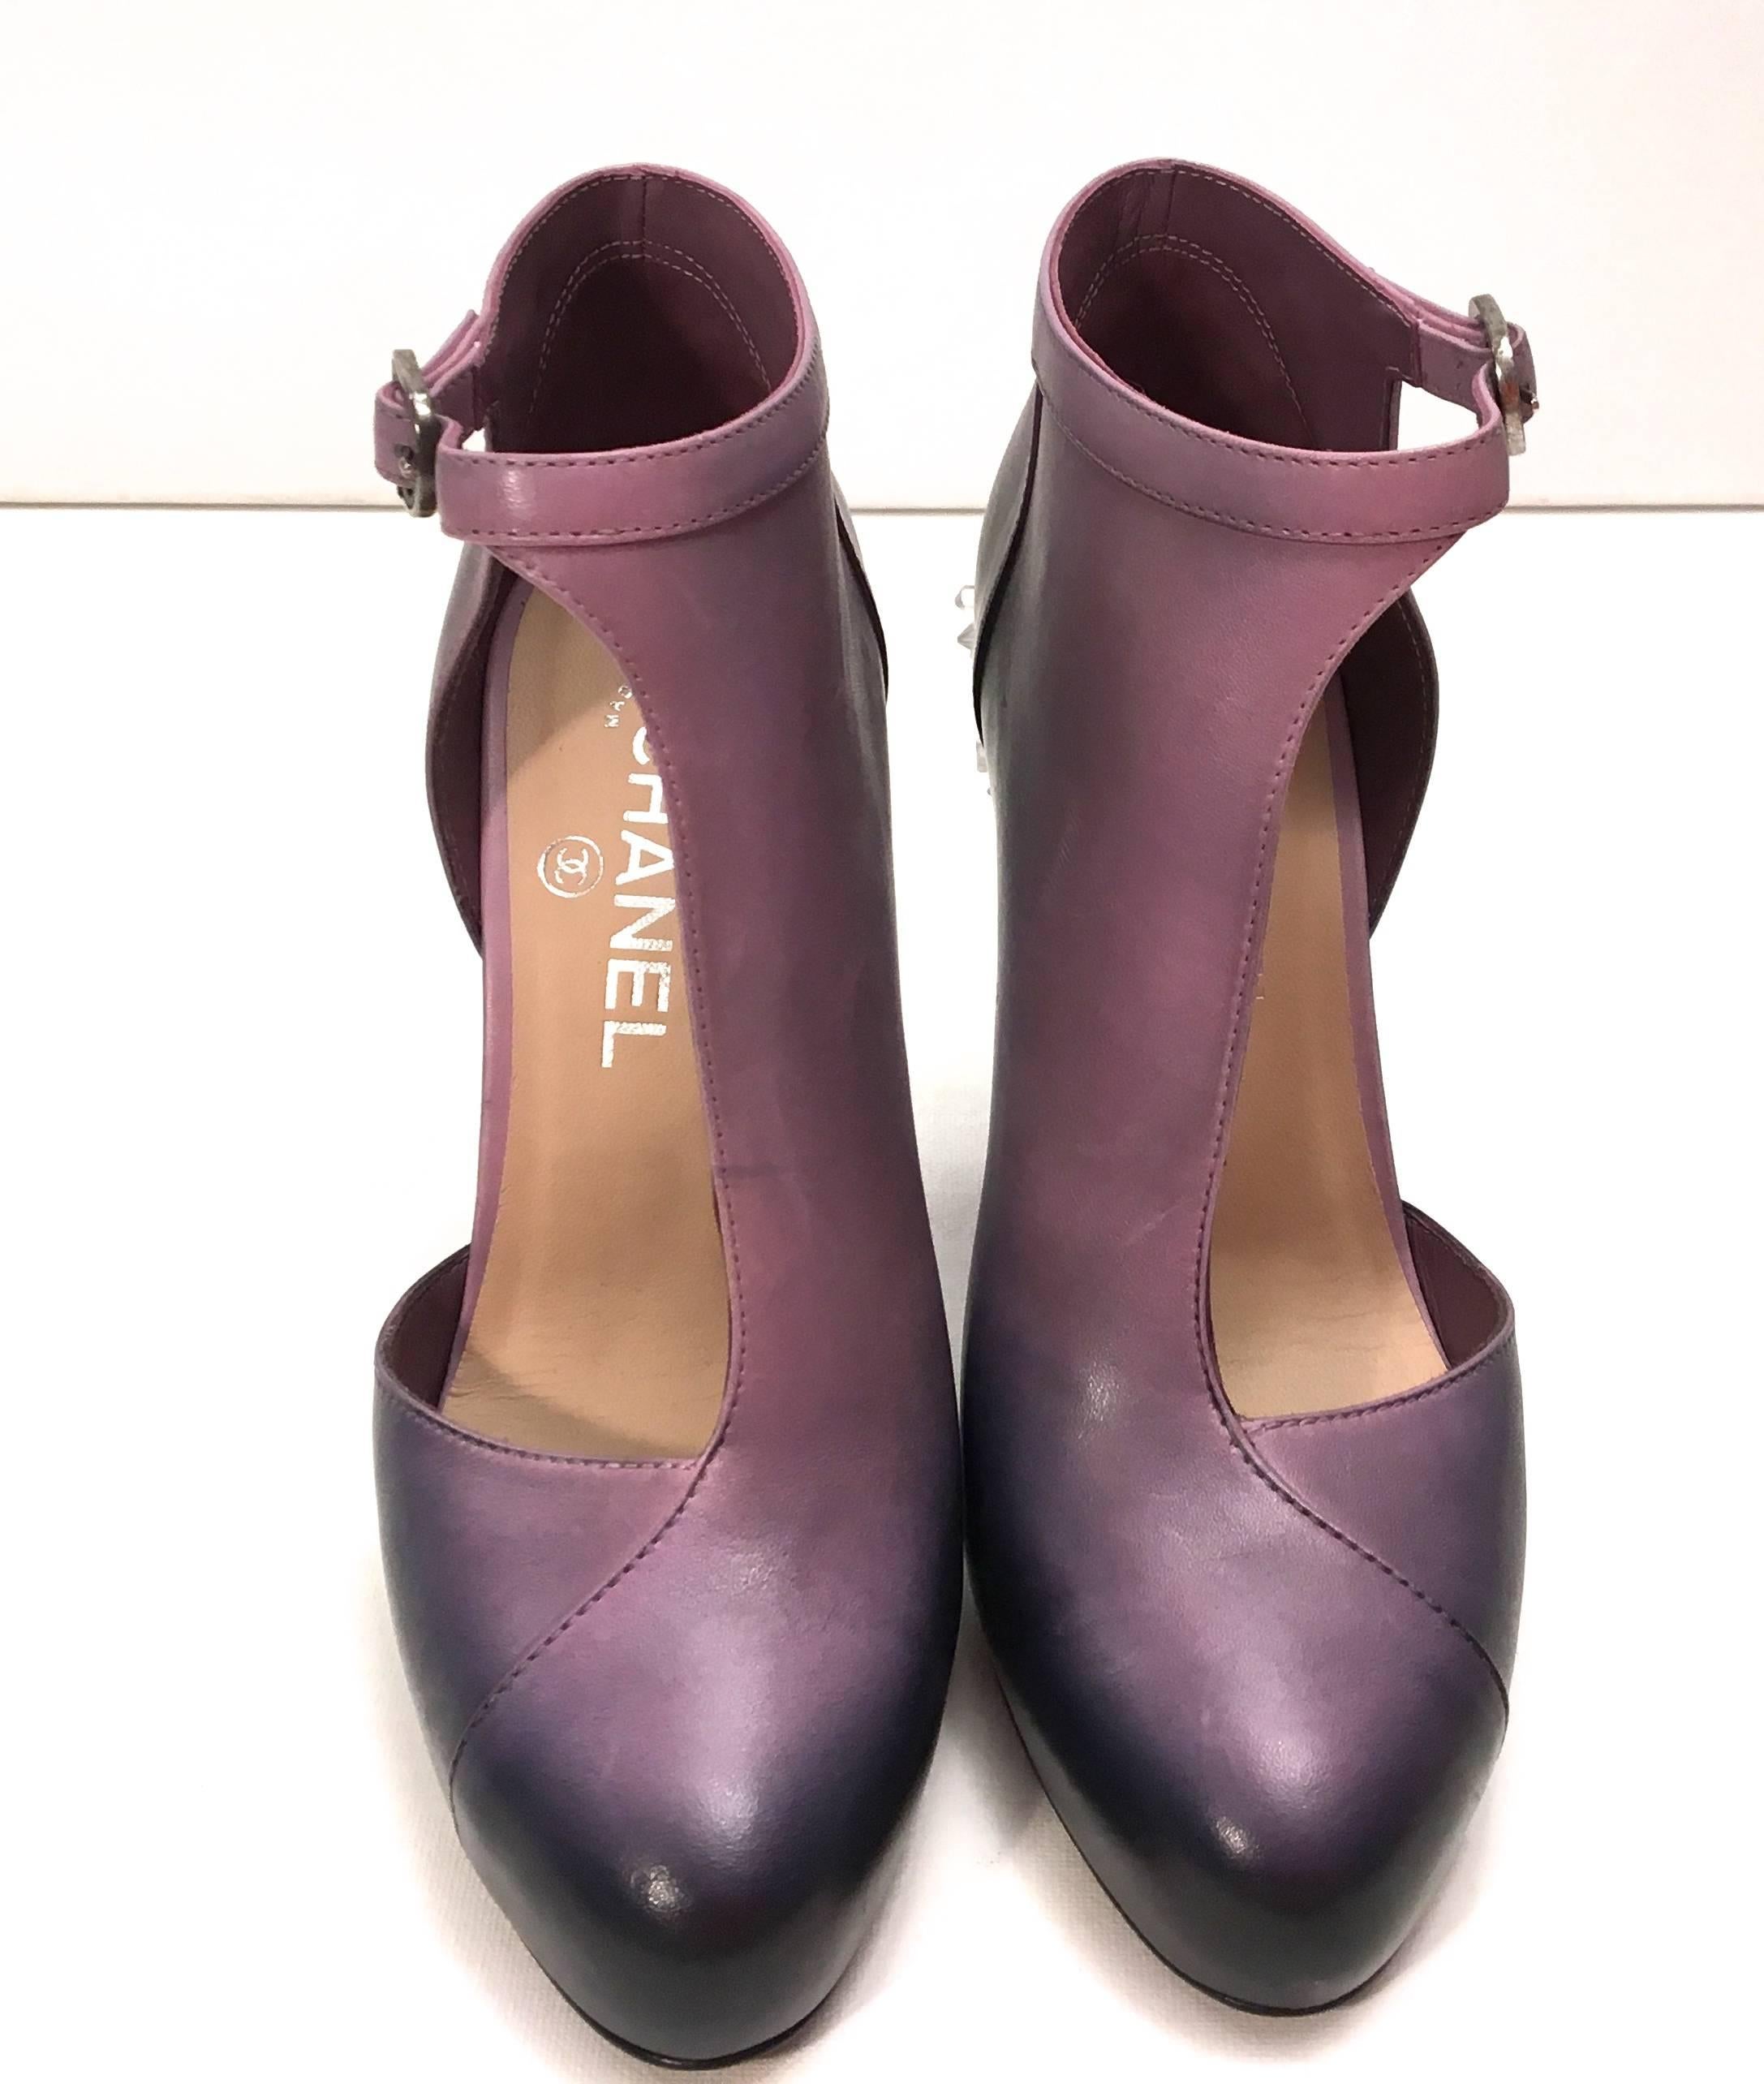 Chanel short runway boots. The shoes are a size 38 and run slightly small. They are a gradient of purple and black with half of the foot revealed. Closed toe. They have a purple lucite heel that looks like a cluster of ice in both purple and clear